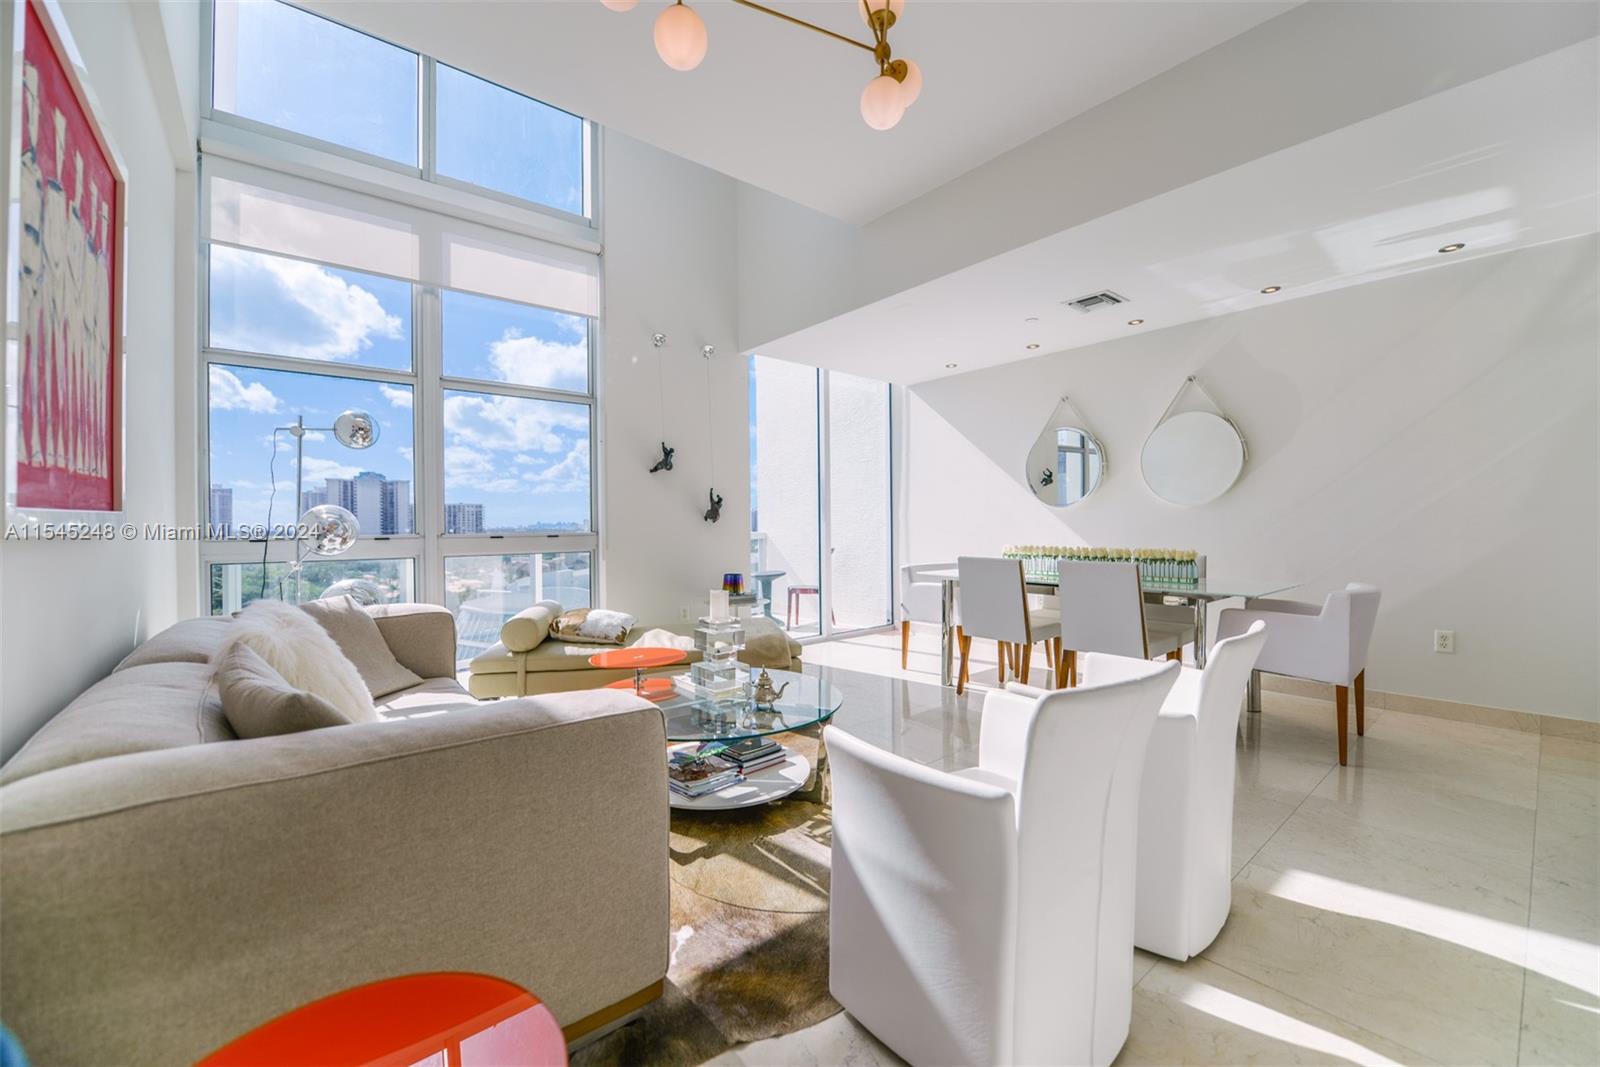 Experience luxury living in this unique two-story,  2-bedroom, 2-bathroom penthouse condo boasting city and intracoastal views in Aventura, FL. Spanning 1,205 square feet, this unit features a large open kitchen with a breakfast bar overlooking the dinning and living spaces.  The second floor features a nearly 500 square-foot private rooftop terrace perfect for entertaining. Residents enjoy access to a range of upscale amenities including a pool, gym, sauna, hot tub and valet. With one parking space included, this penthouse offers the epitome of sophistication and convenience in one of Aventura's most sought-after locations, close to A+ schools, shopping, dinning, Aventura Mall, Beaches and Brightline's newest Aventura station. Don't miss your chance to call this luxurious condo home.